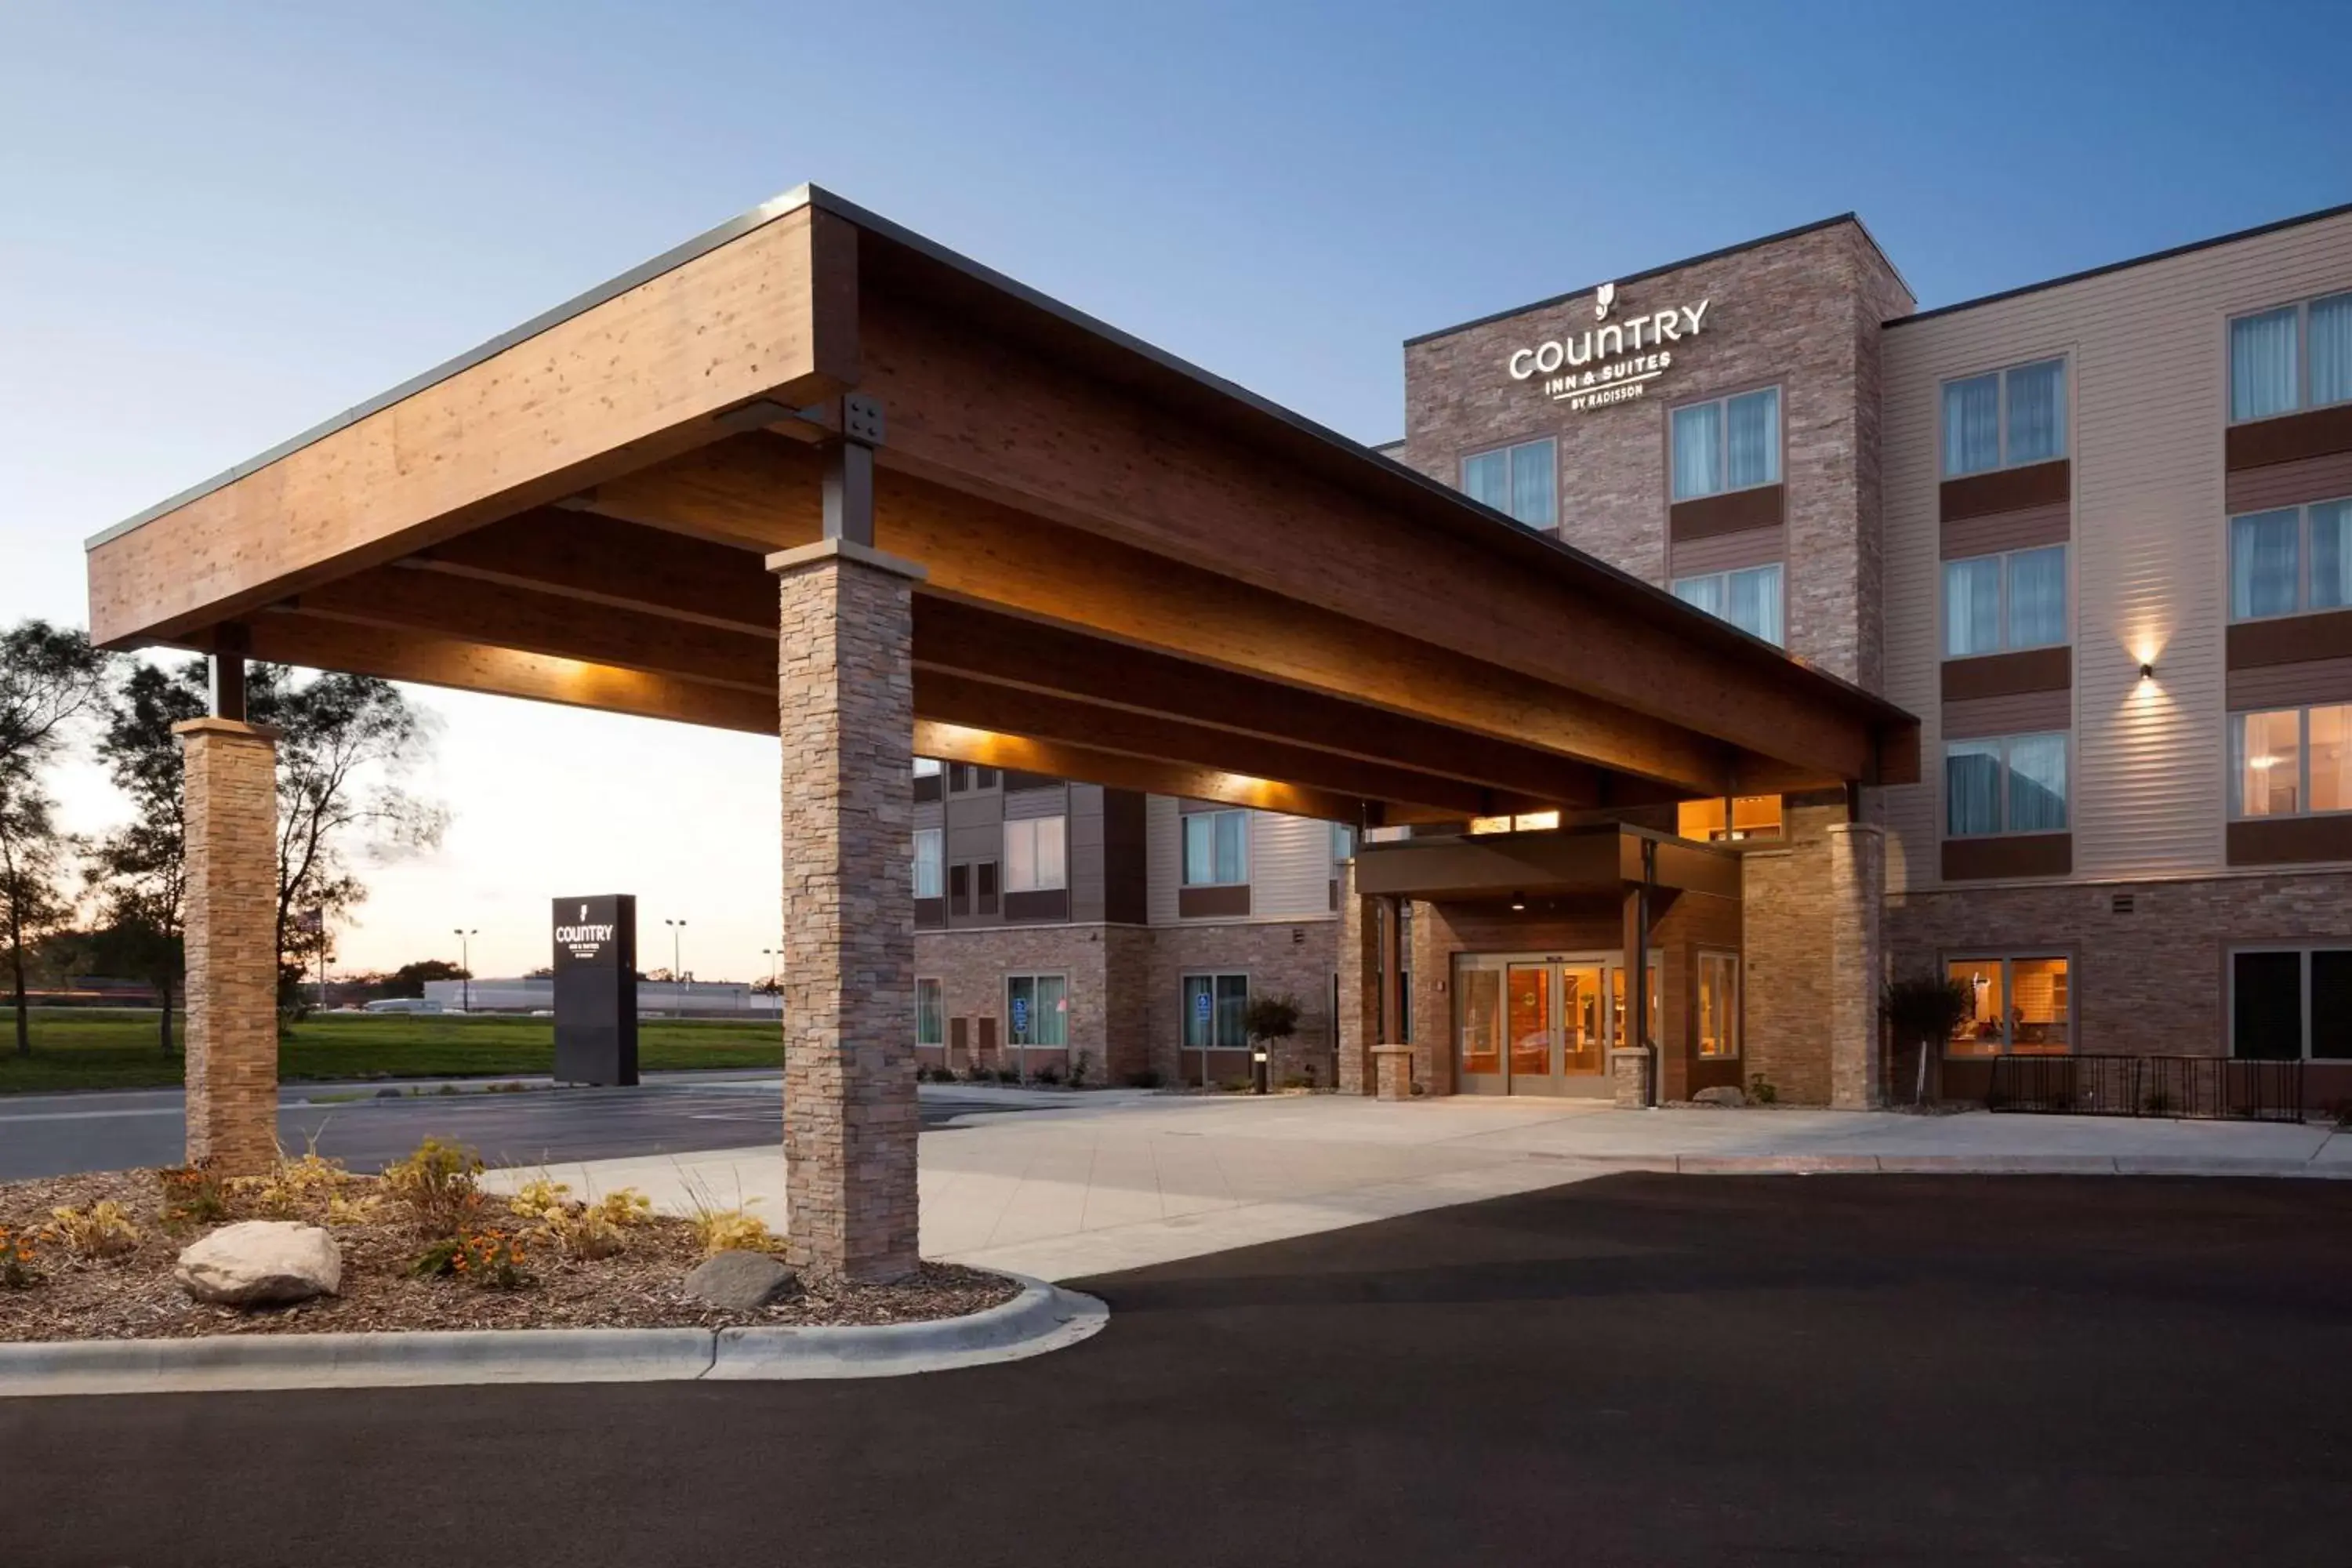 Property Building in Country Inn & Suites by Radisson, Roseville, MN